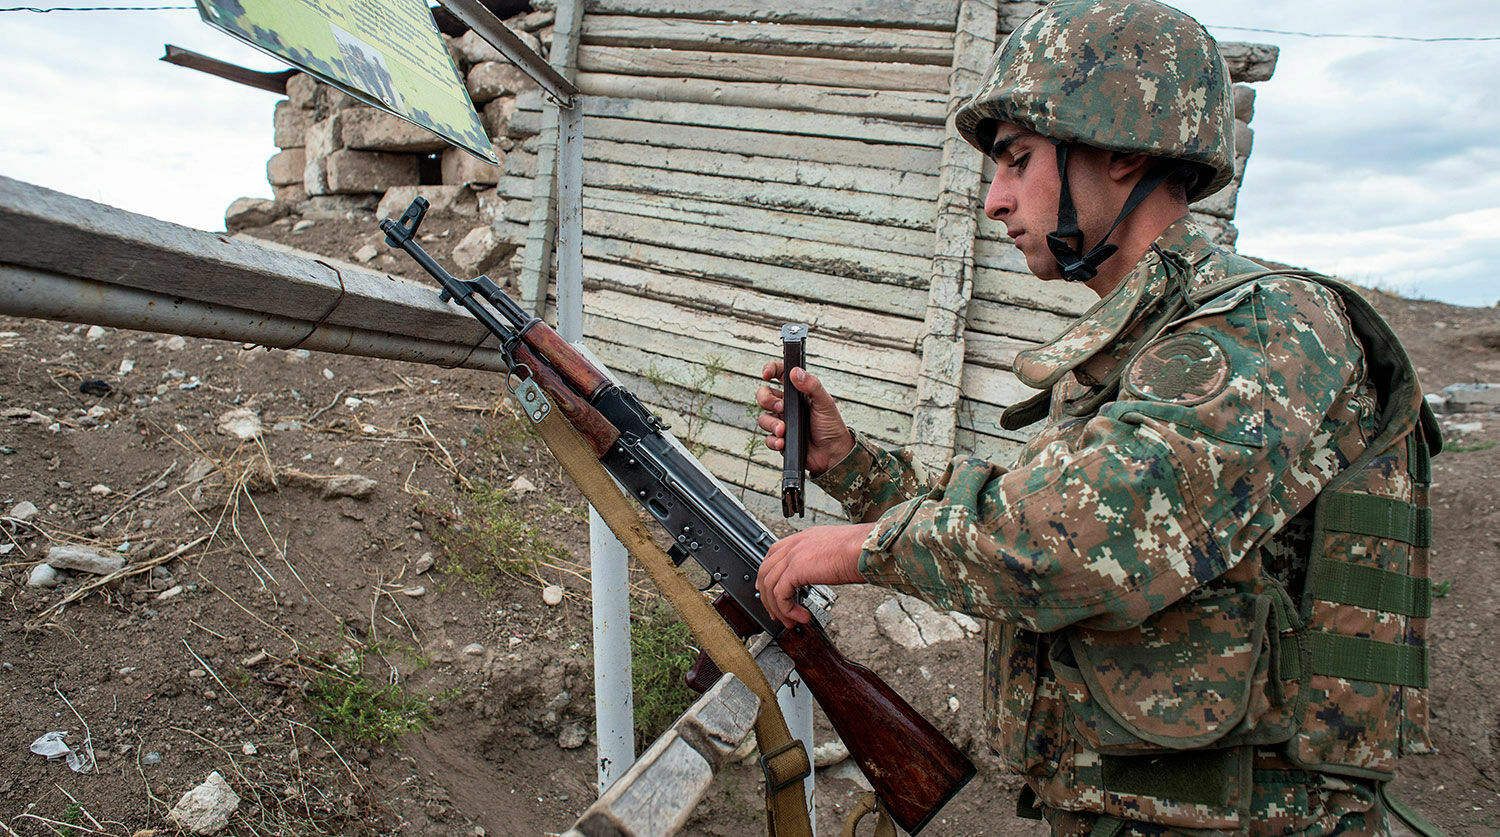 Almost three thousand soldiers died in battles for Nagorno-Karabakh